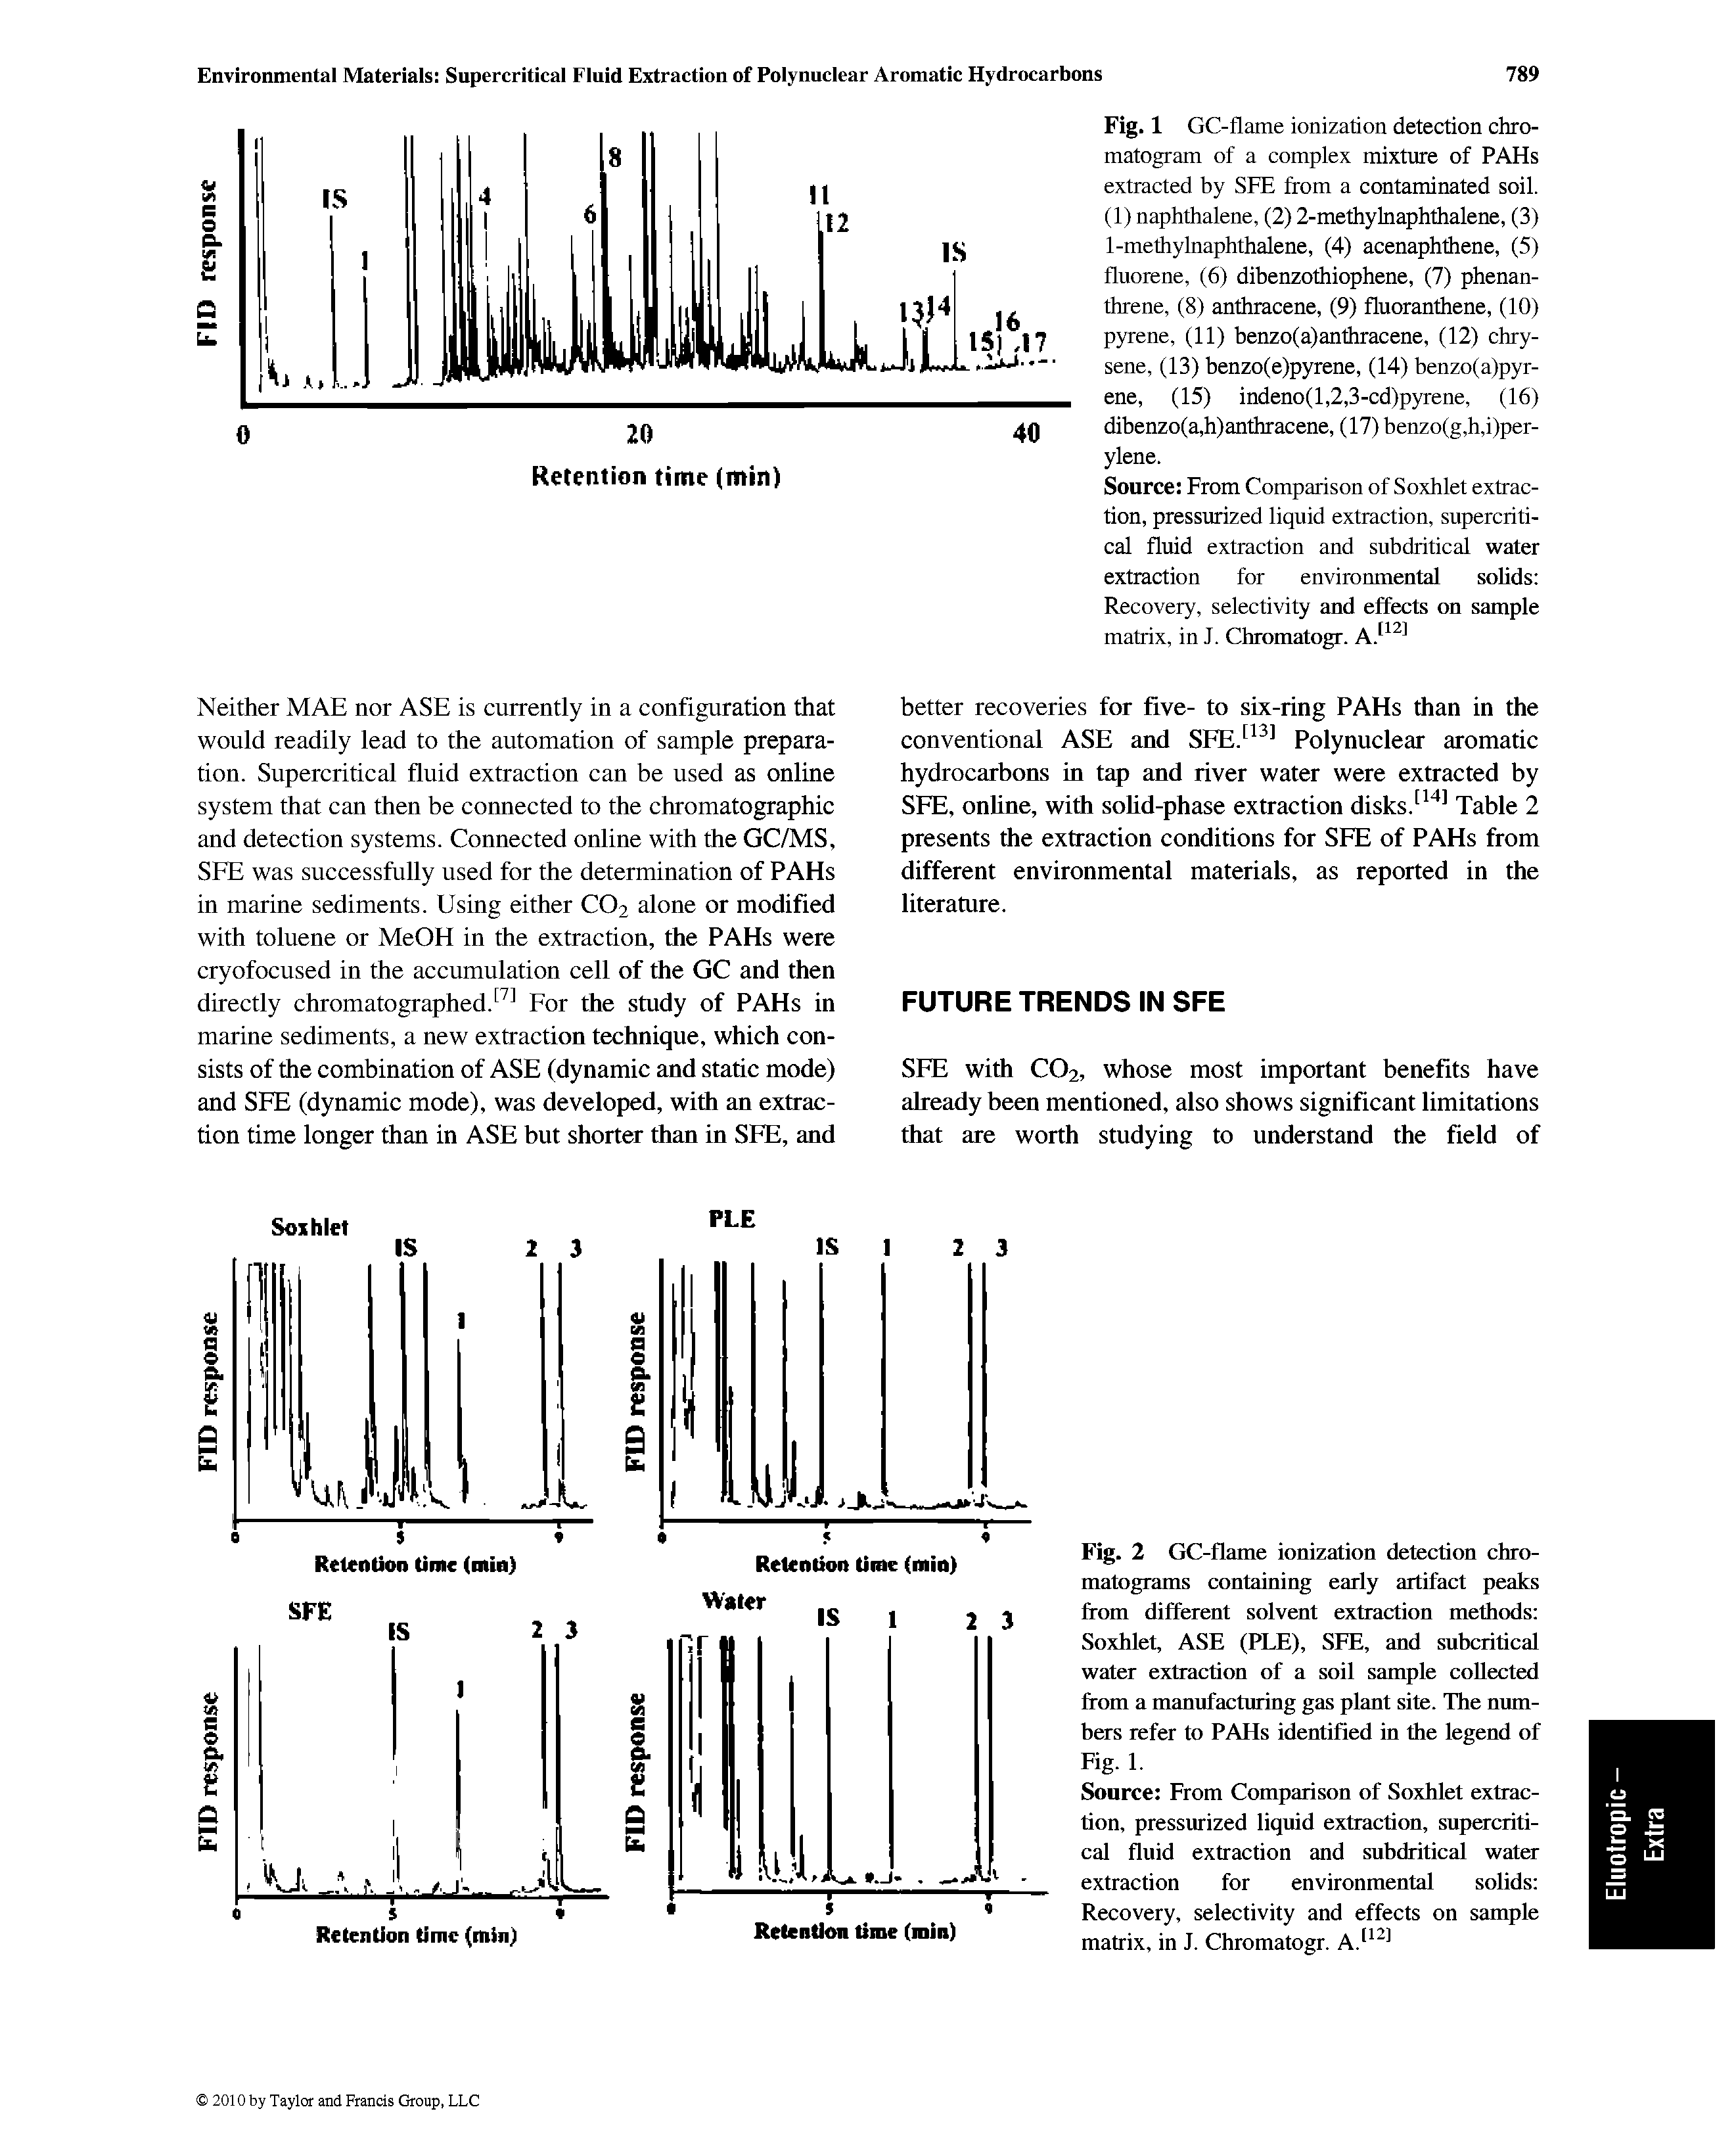 Fig. 2 GC-flame ionization detection chromatograms containing early artifact peaks from different solvent extraction methods Soxhlet, ASE (PLE), SFE, and suhcritical water extraction of a soil sample collected from a manufacturing gas plant site. The numbers refer to PAHs identified in the legend of Fig. 1.